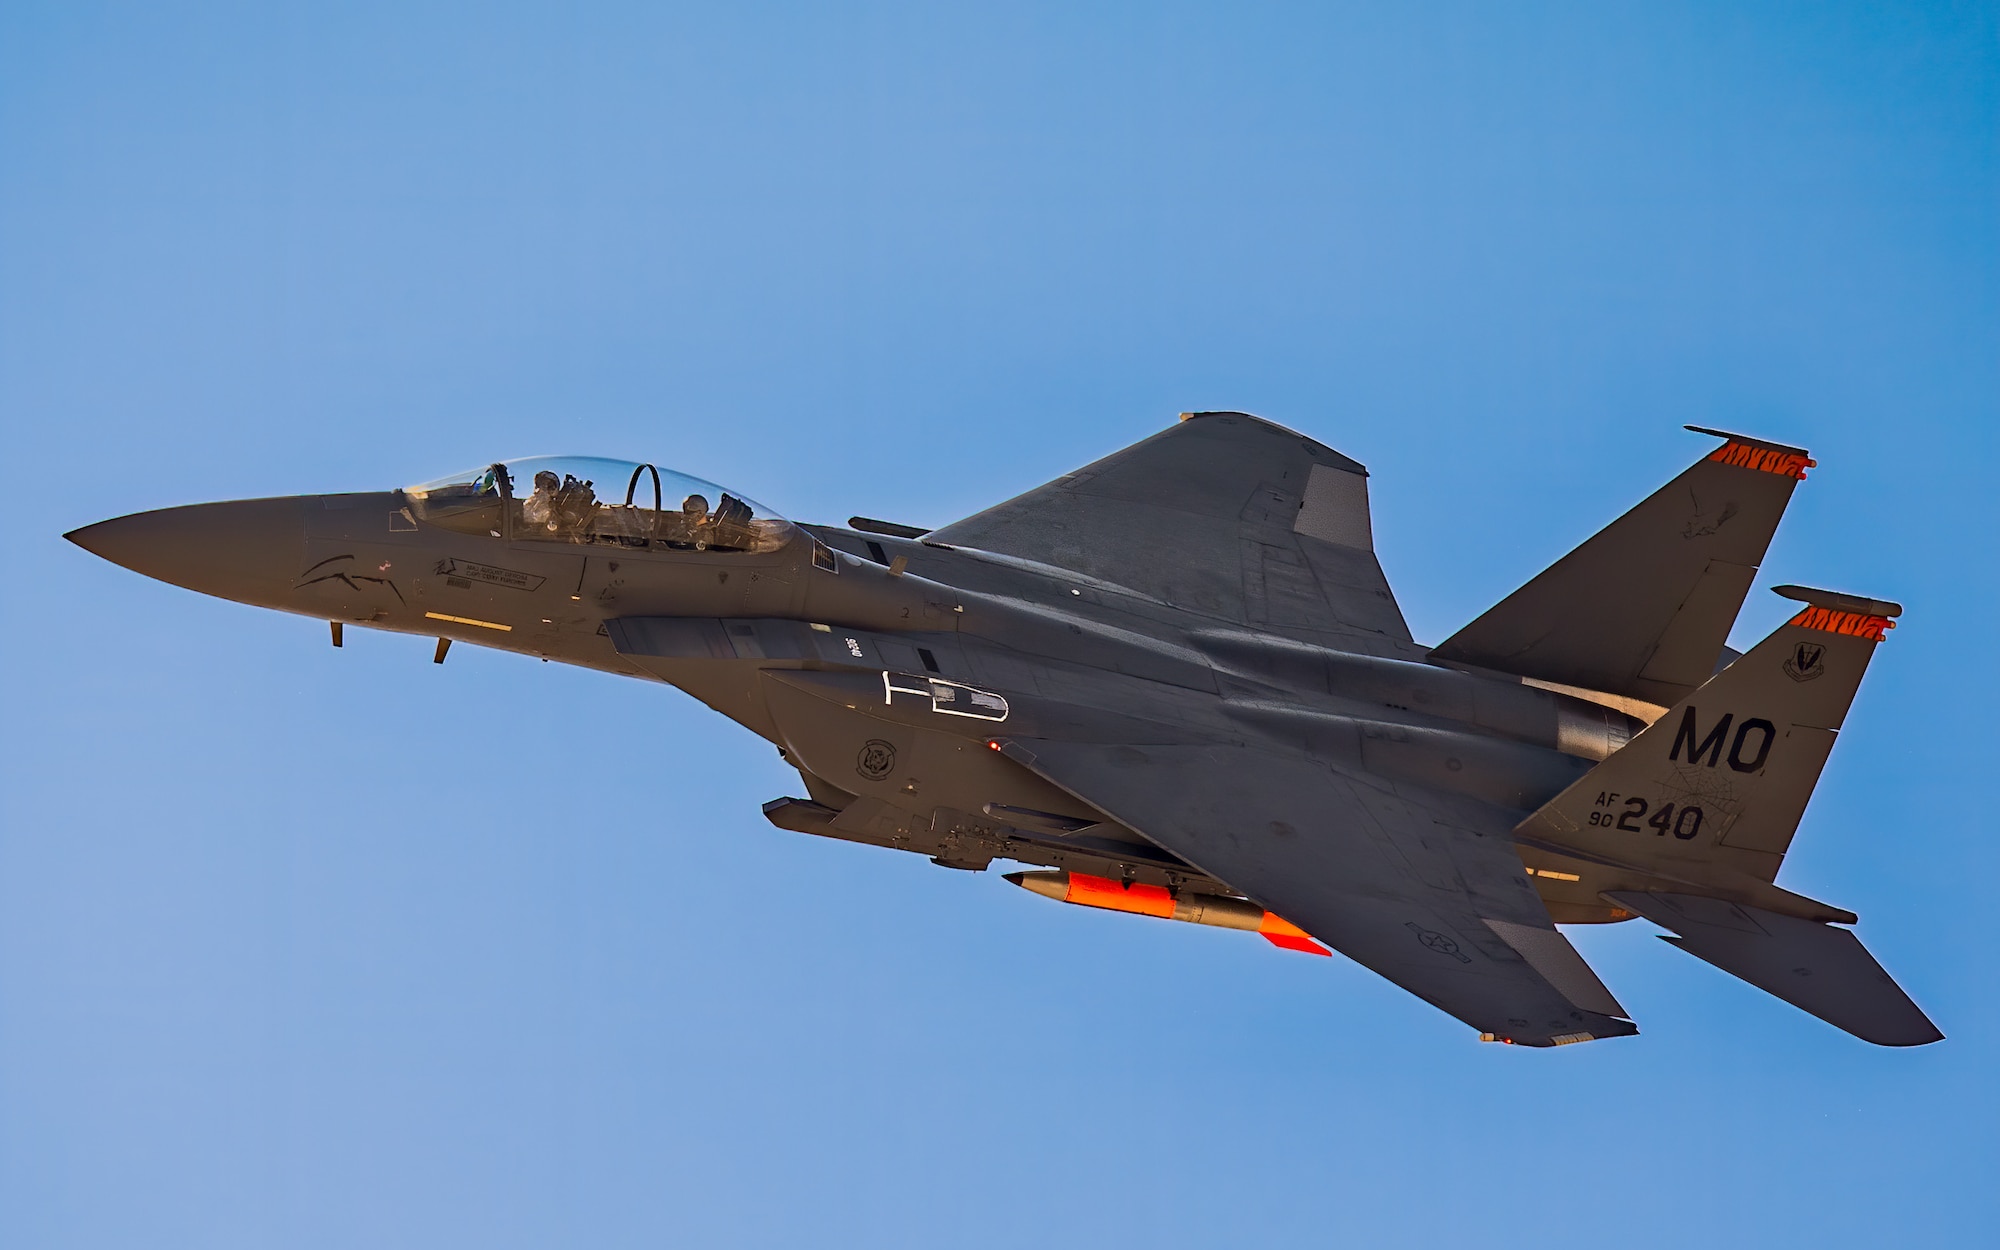 Photo F-15E Strike Eagle carrying a B61 Joint Test Assembly